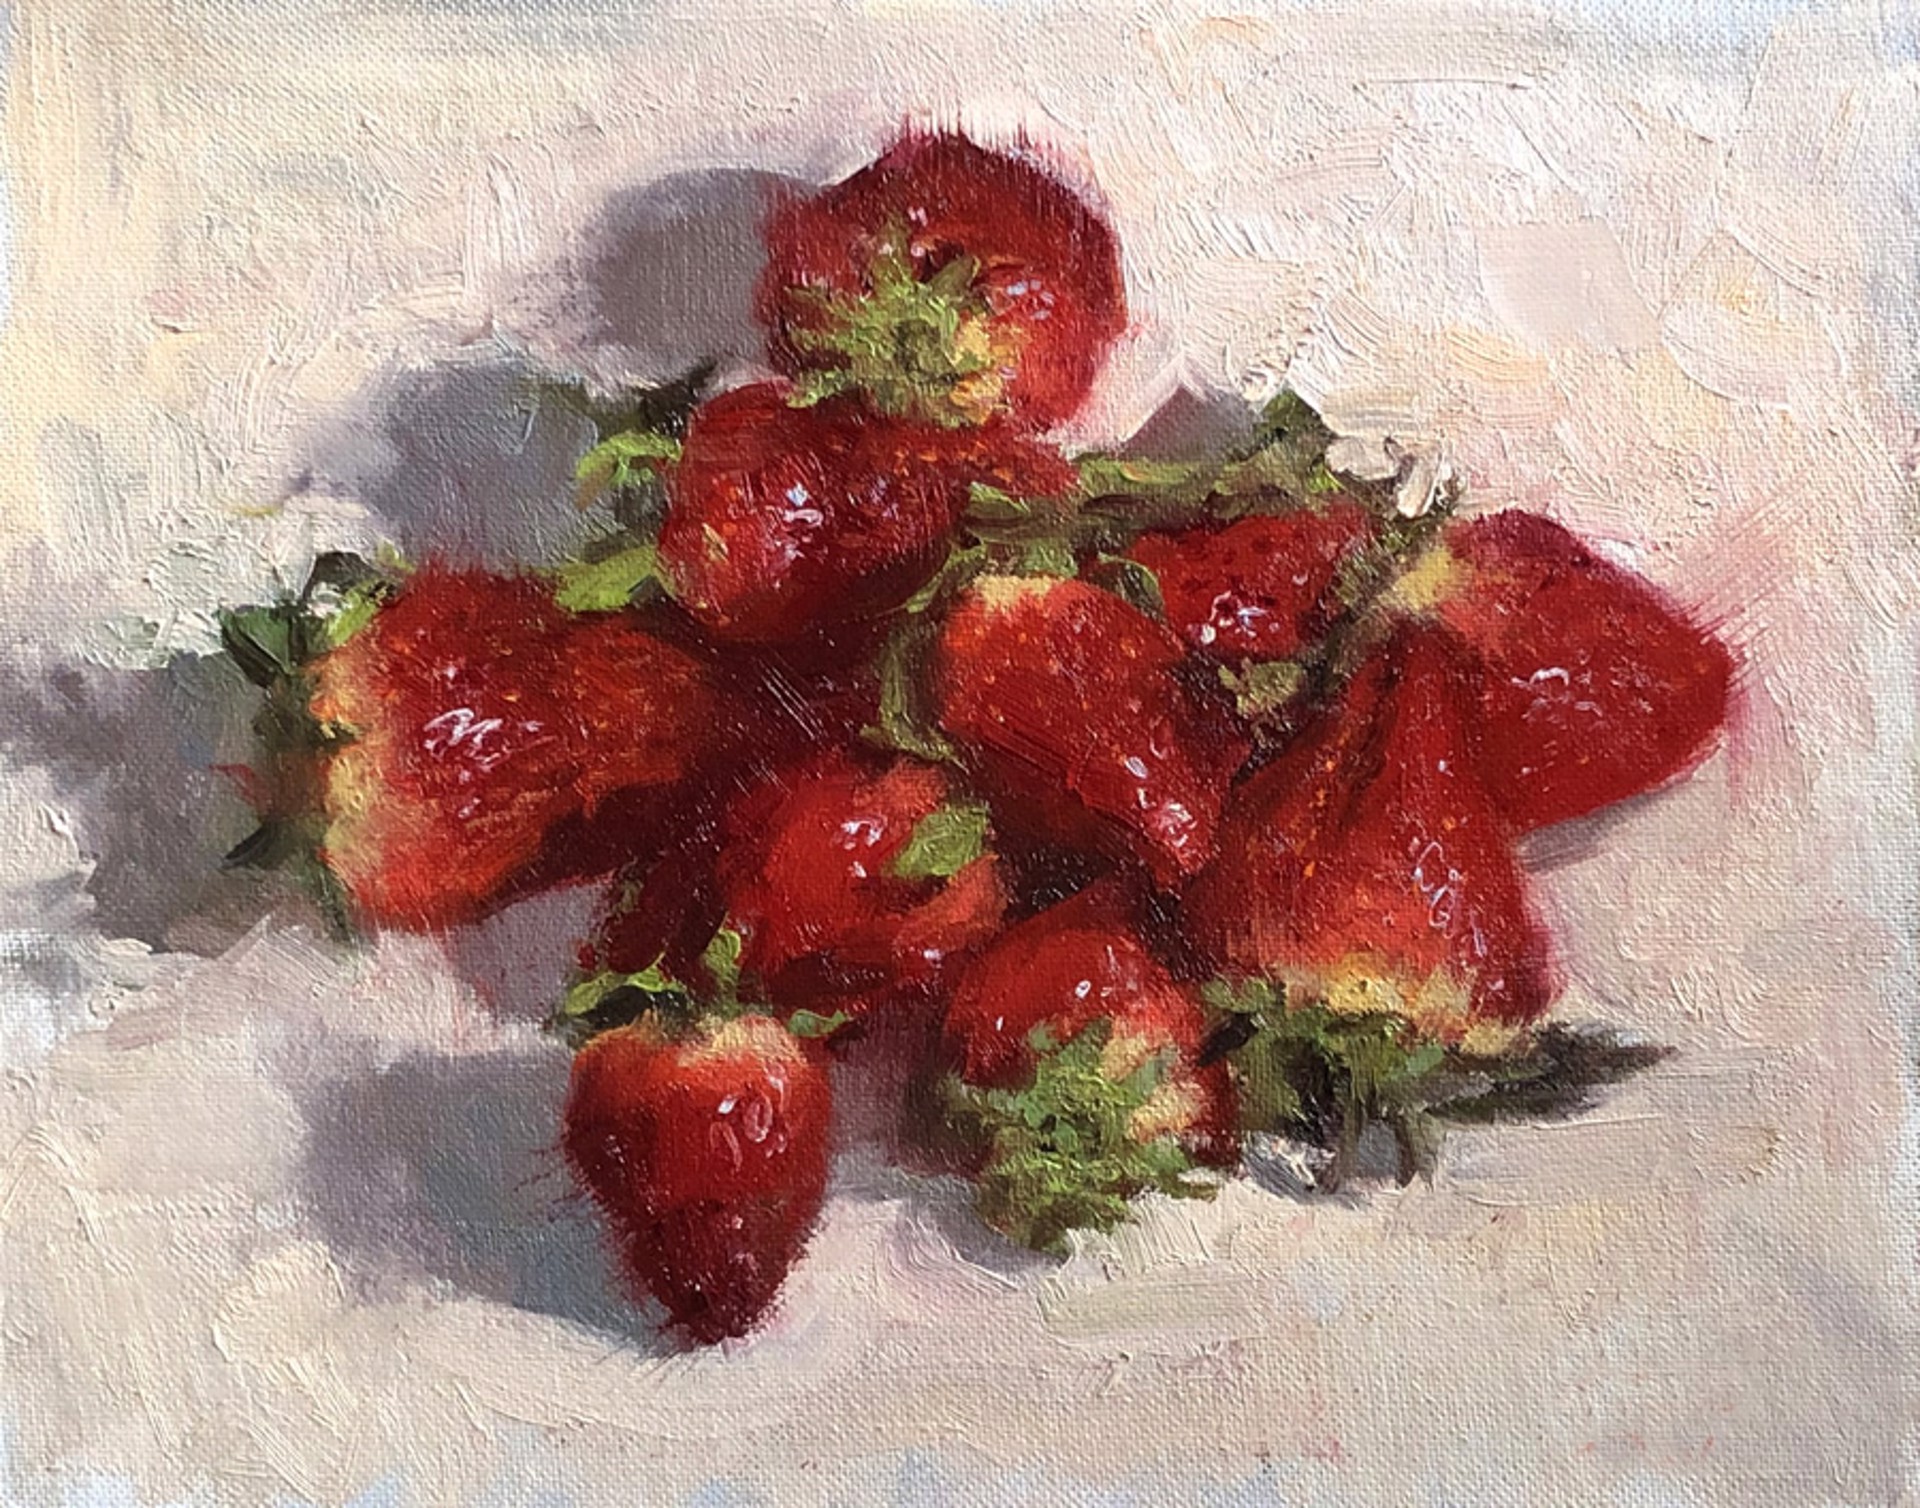 Simply Strawberries by Sue Foell